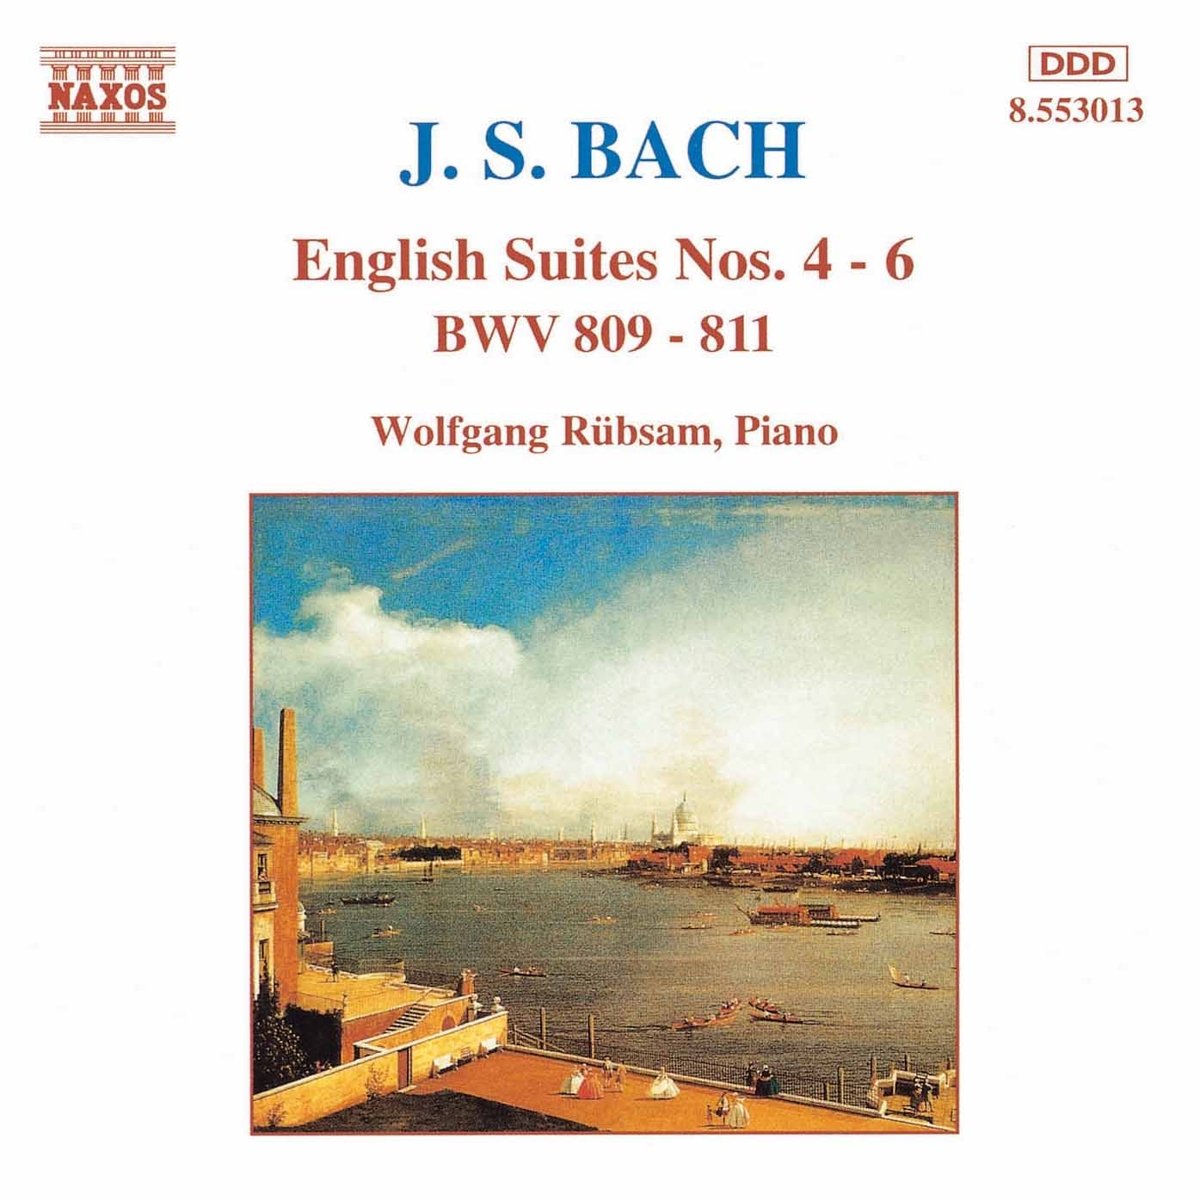 BACH: English Suites 4 - 6